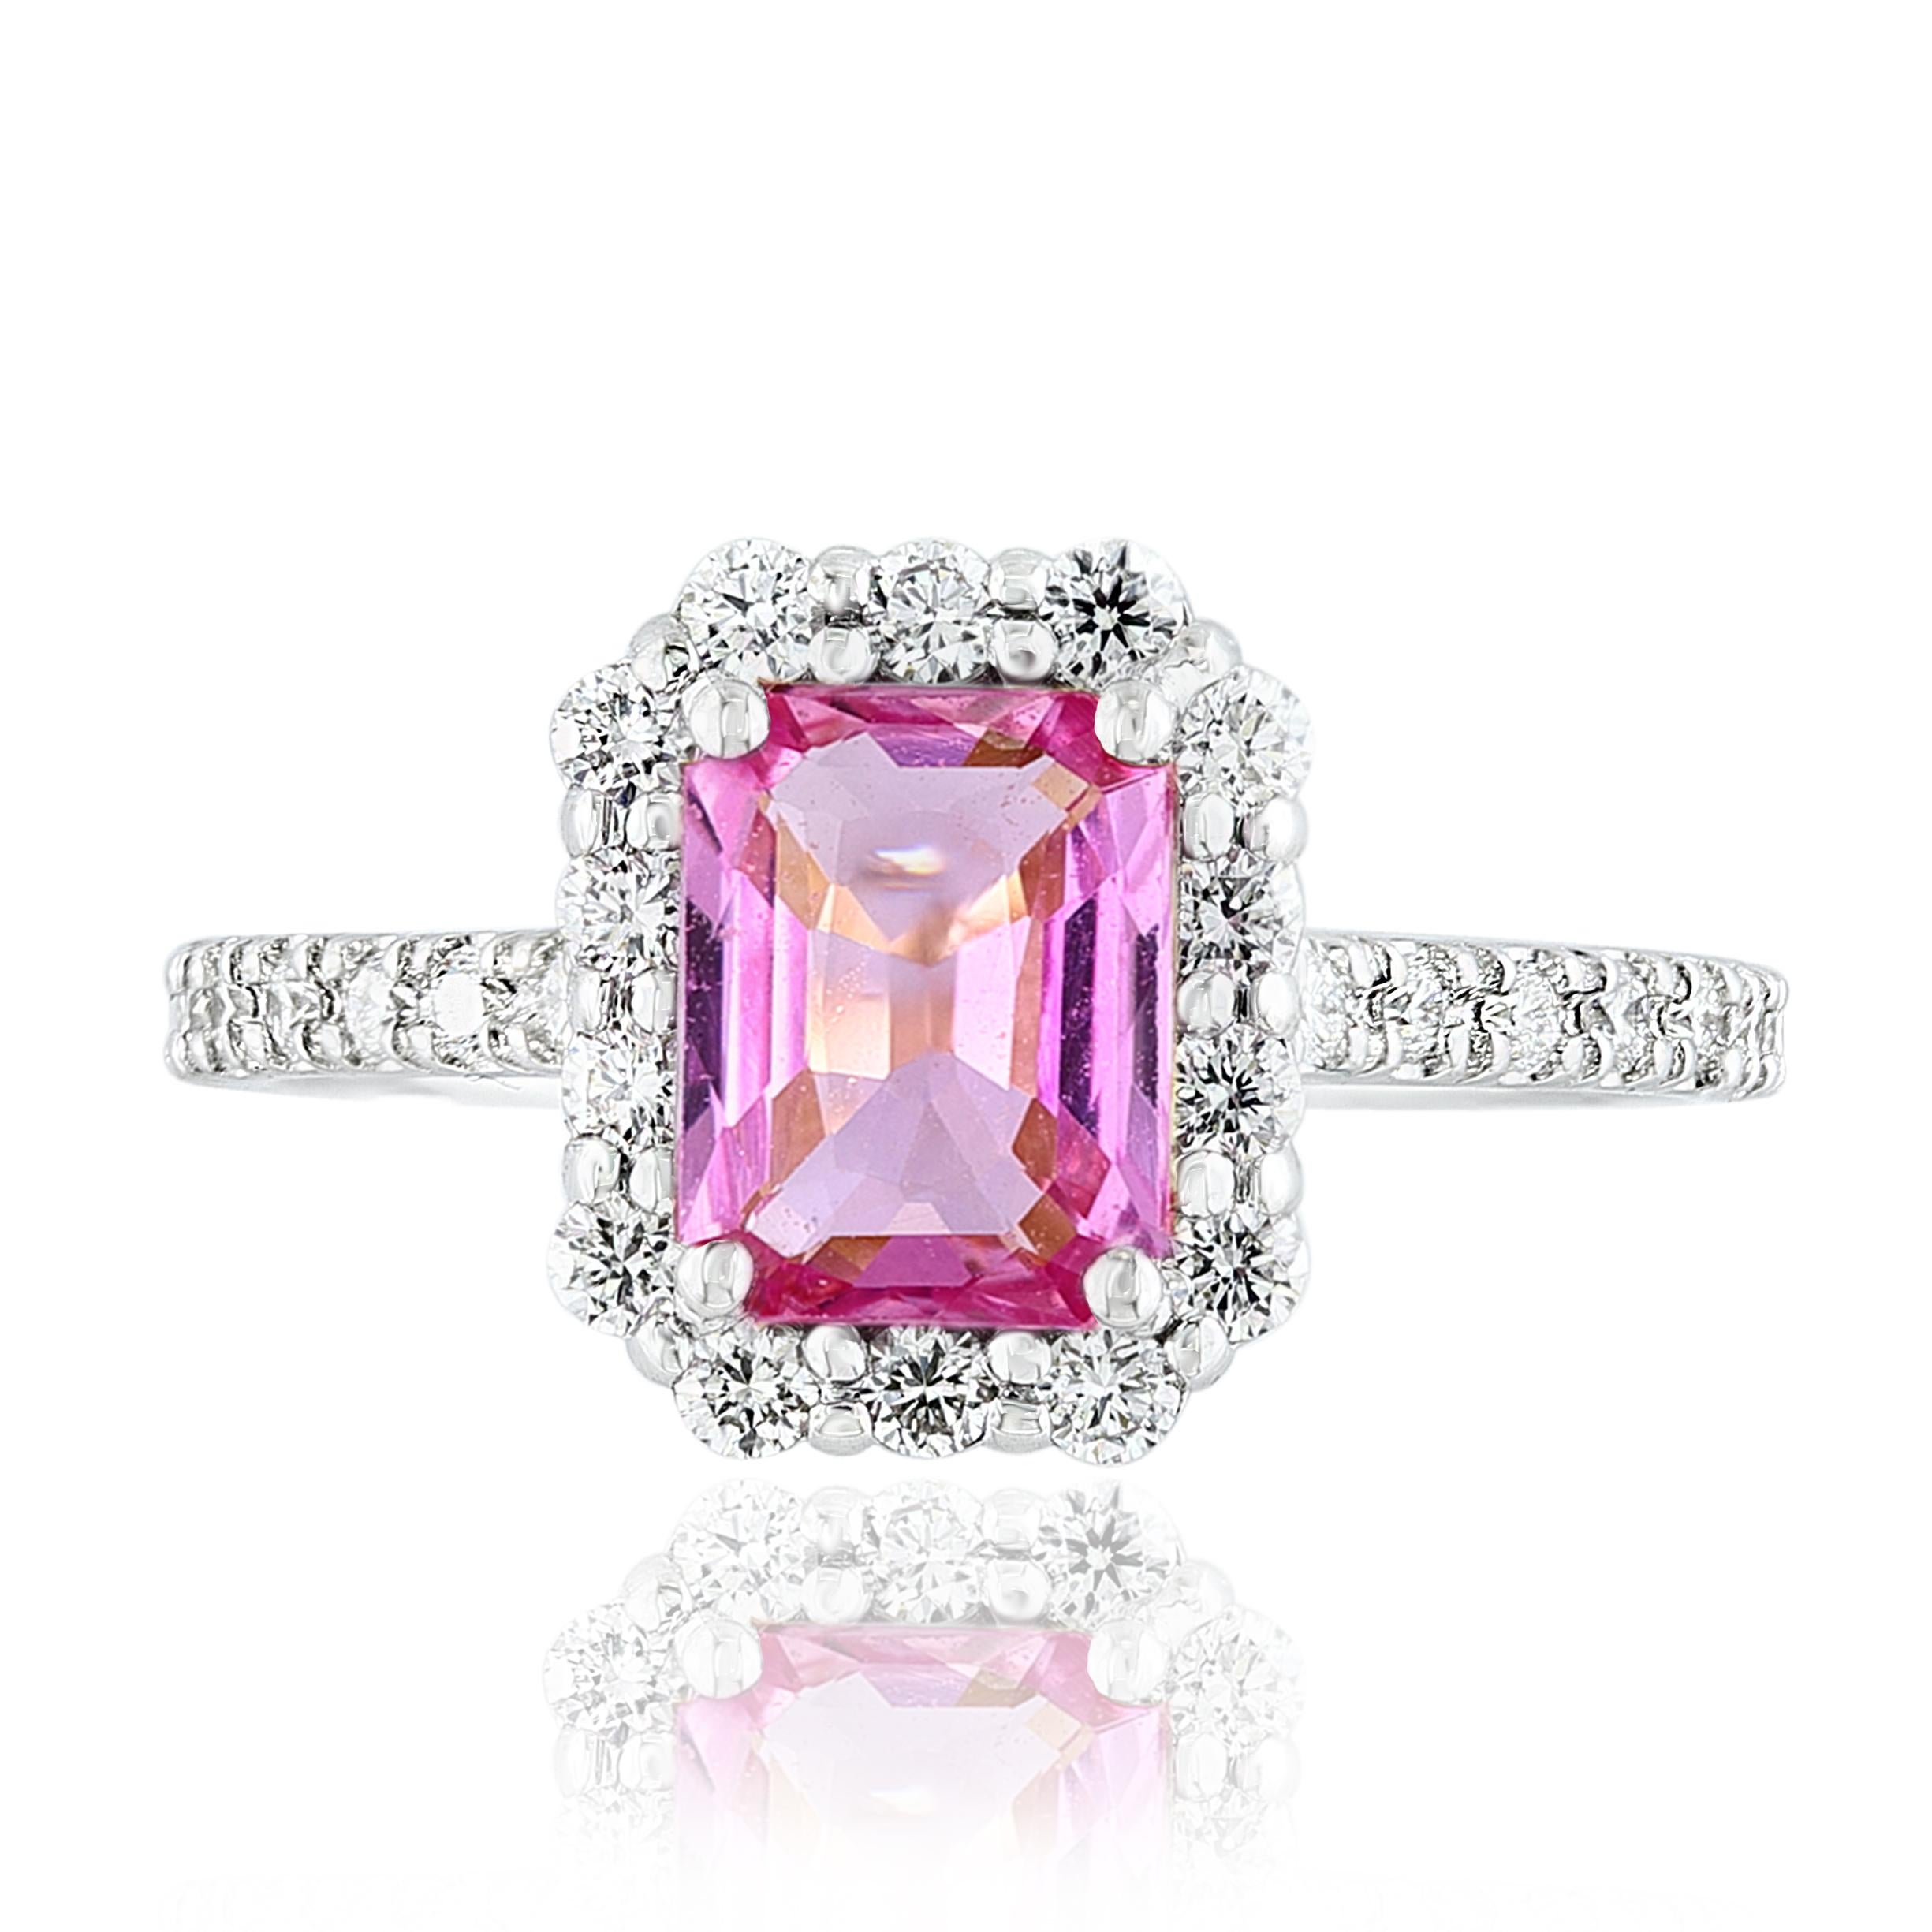 Showcases an emerald-cut pink sapphire weighing 1.59 carats, surrounded by a single row of 28 round brilliant diamonds in a seamless halo design. Set in a thin 14-karat white gold band accented with diamonds. Diamonds weigh 0.44 carats in